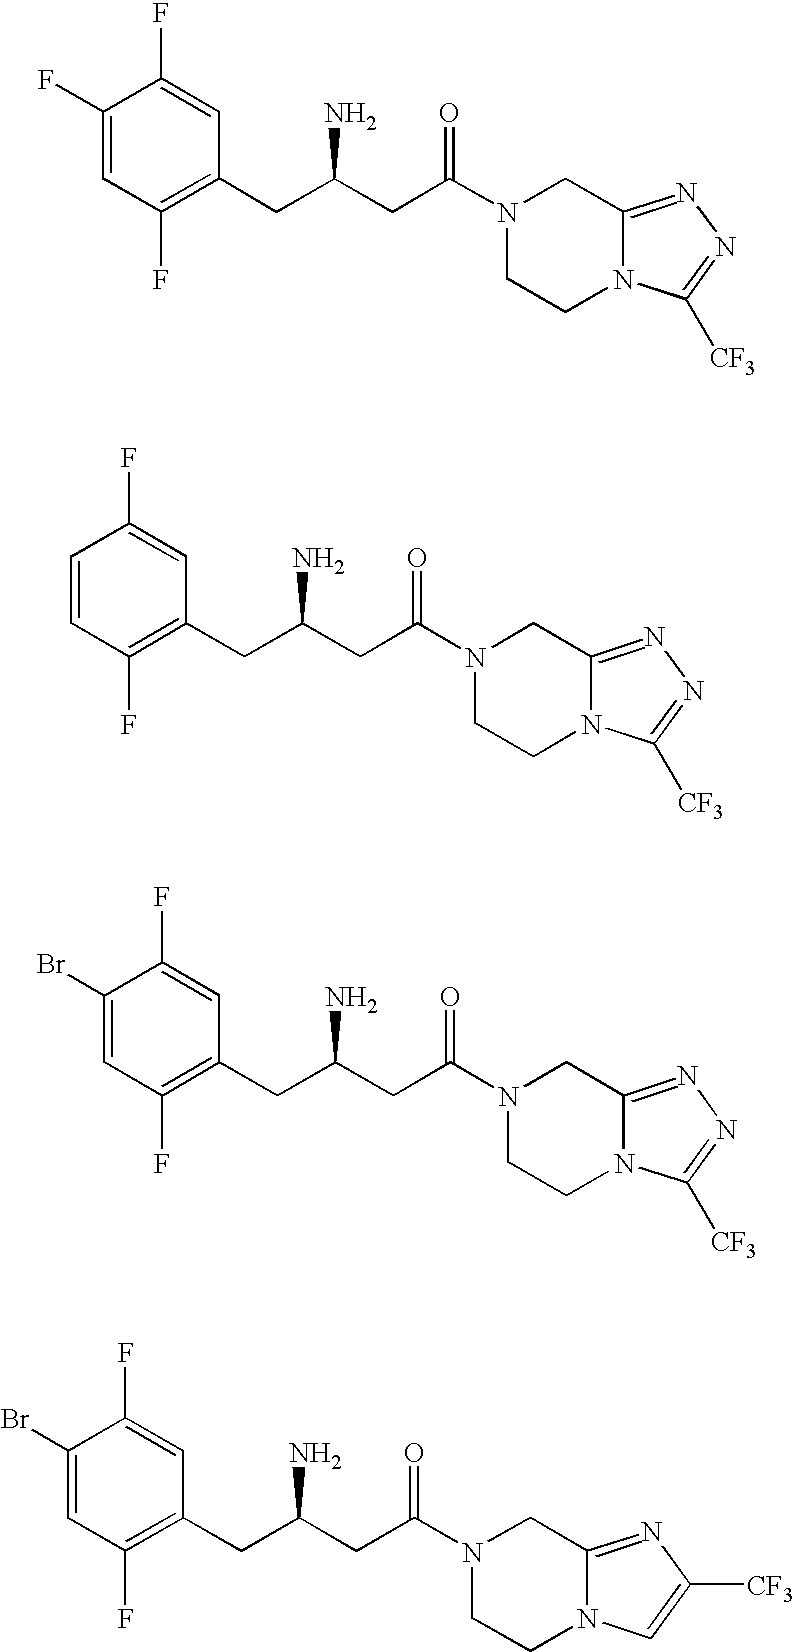 Glucagon receptor antagonist compounds, compositions containing such compounds and methods of use